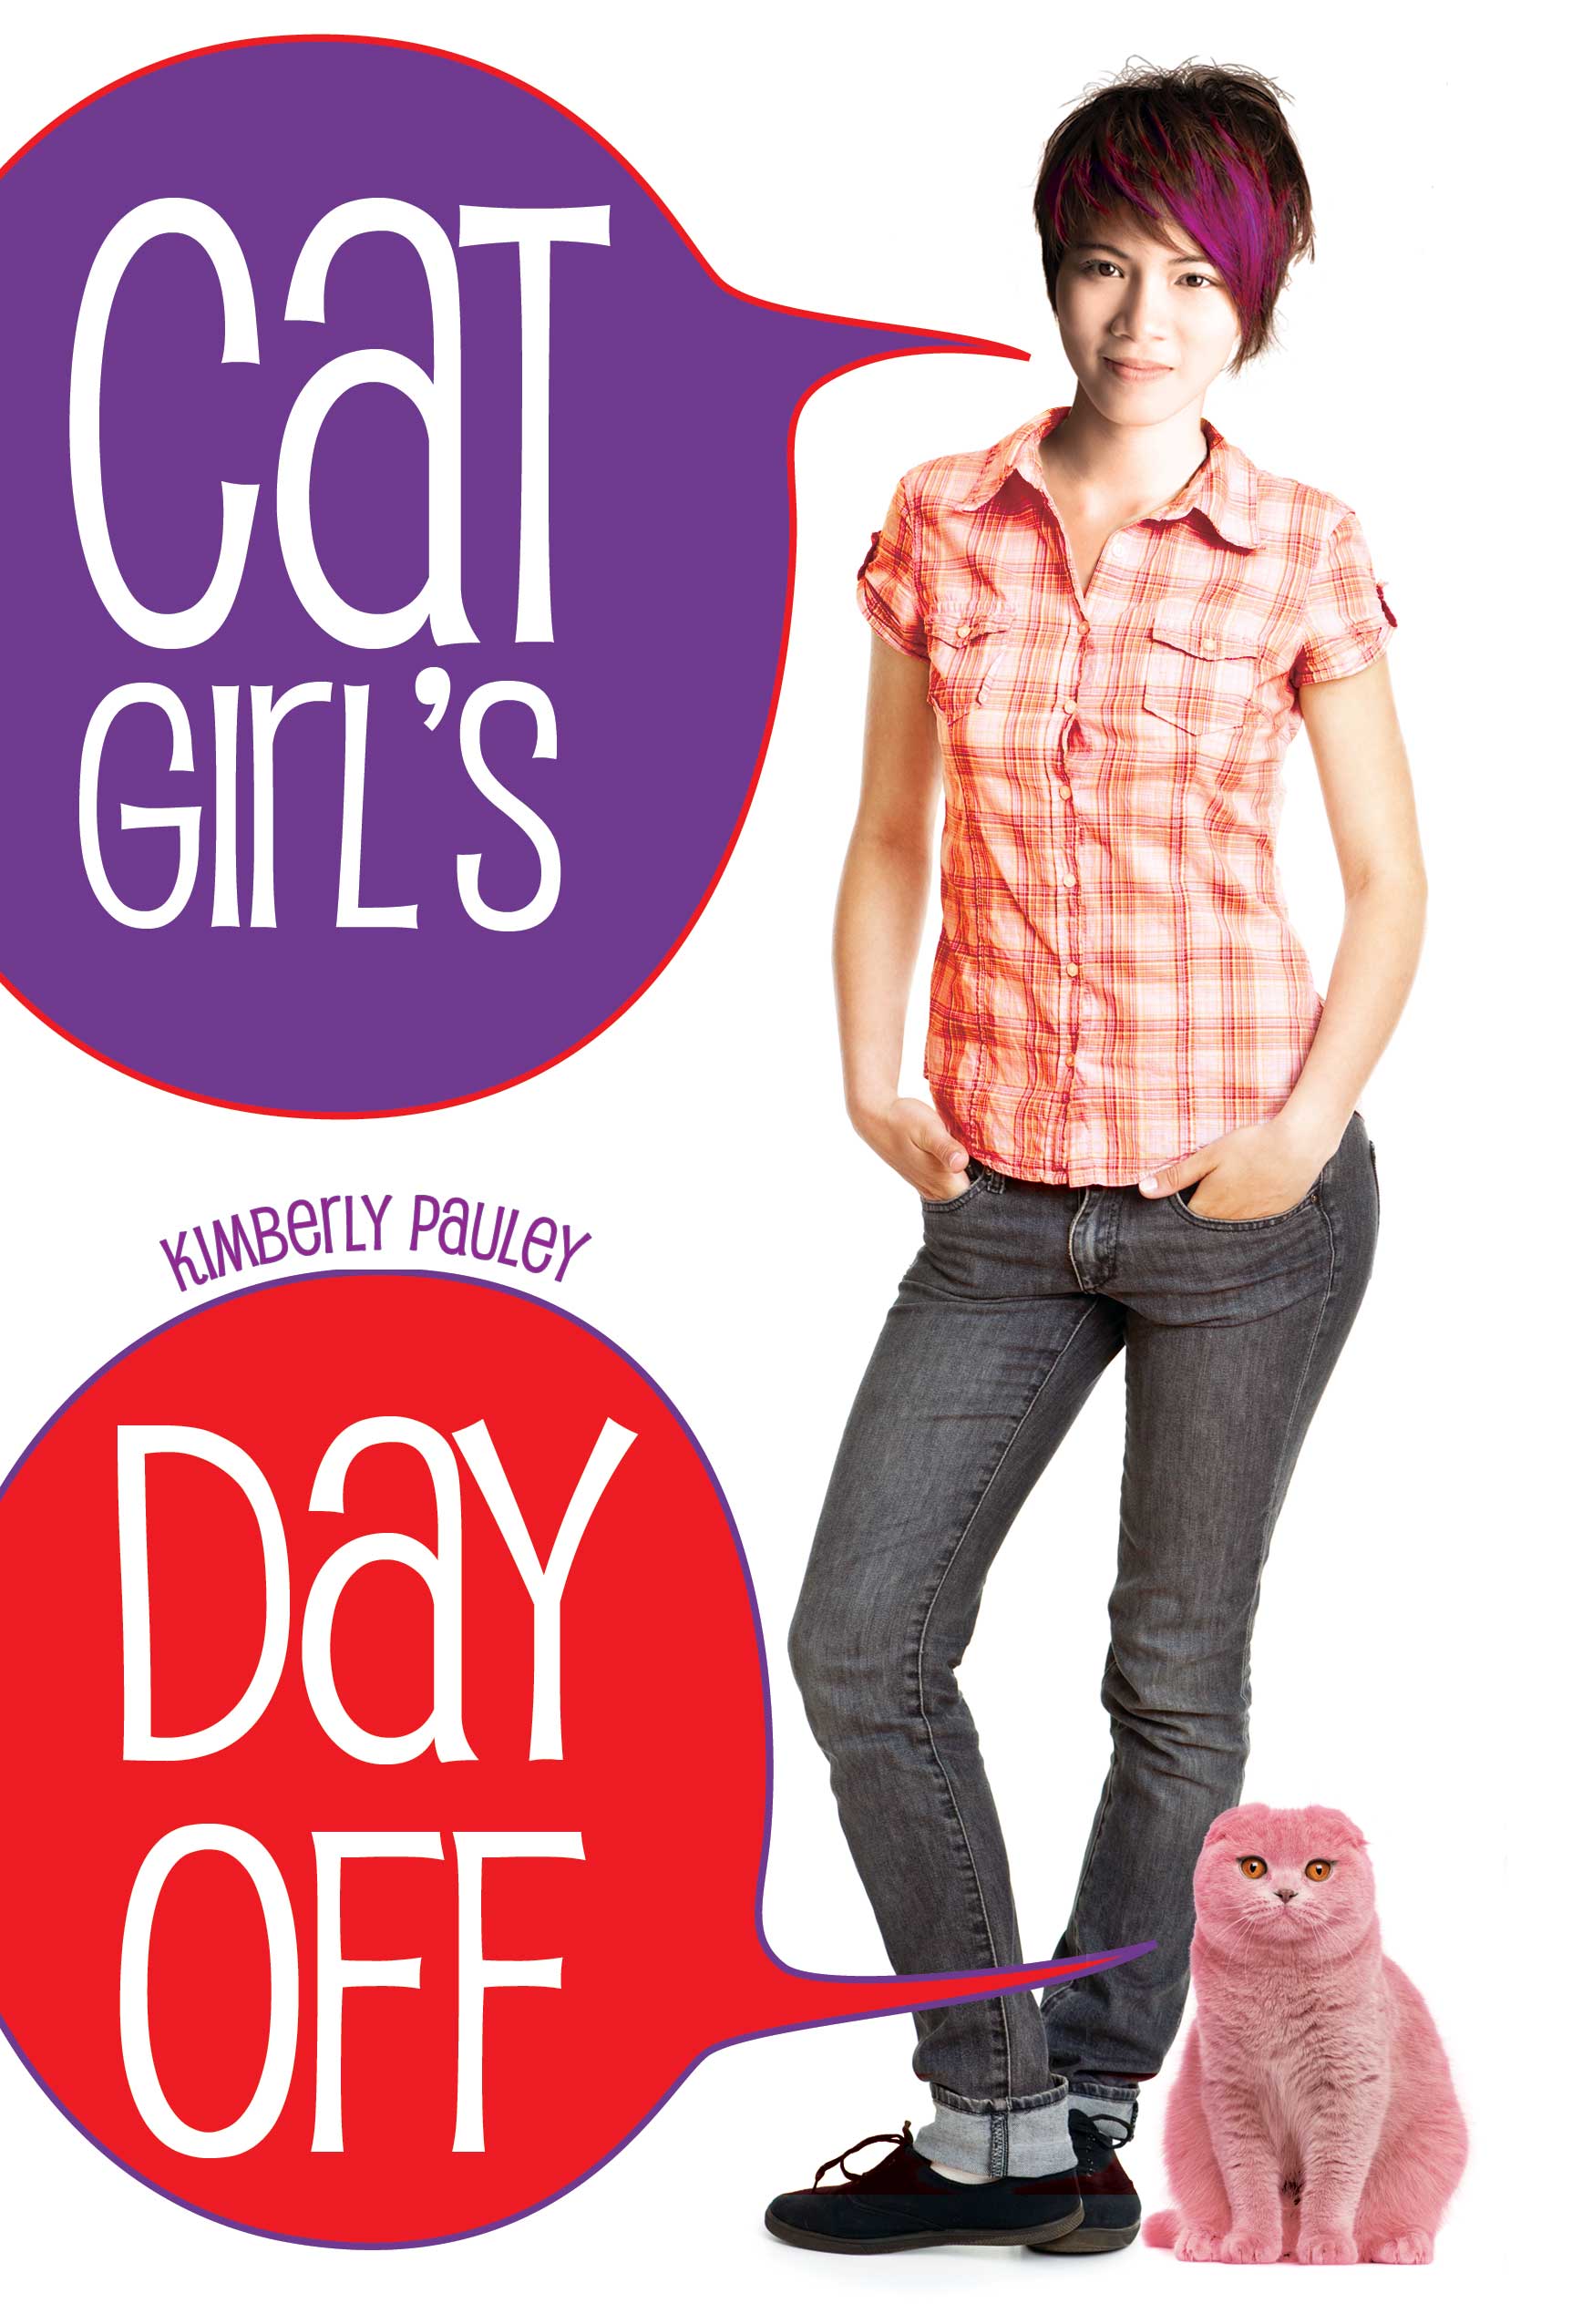 Cat Girl S Day Off Stacy Whitman S Grimoire